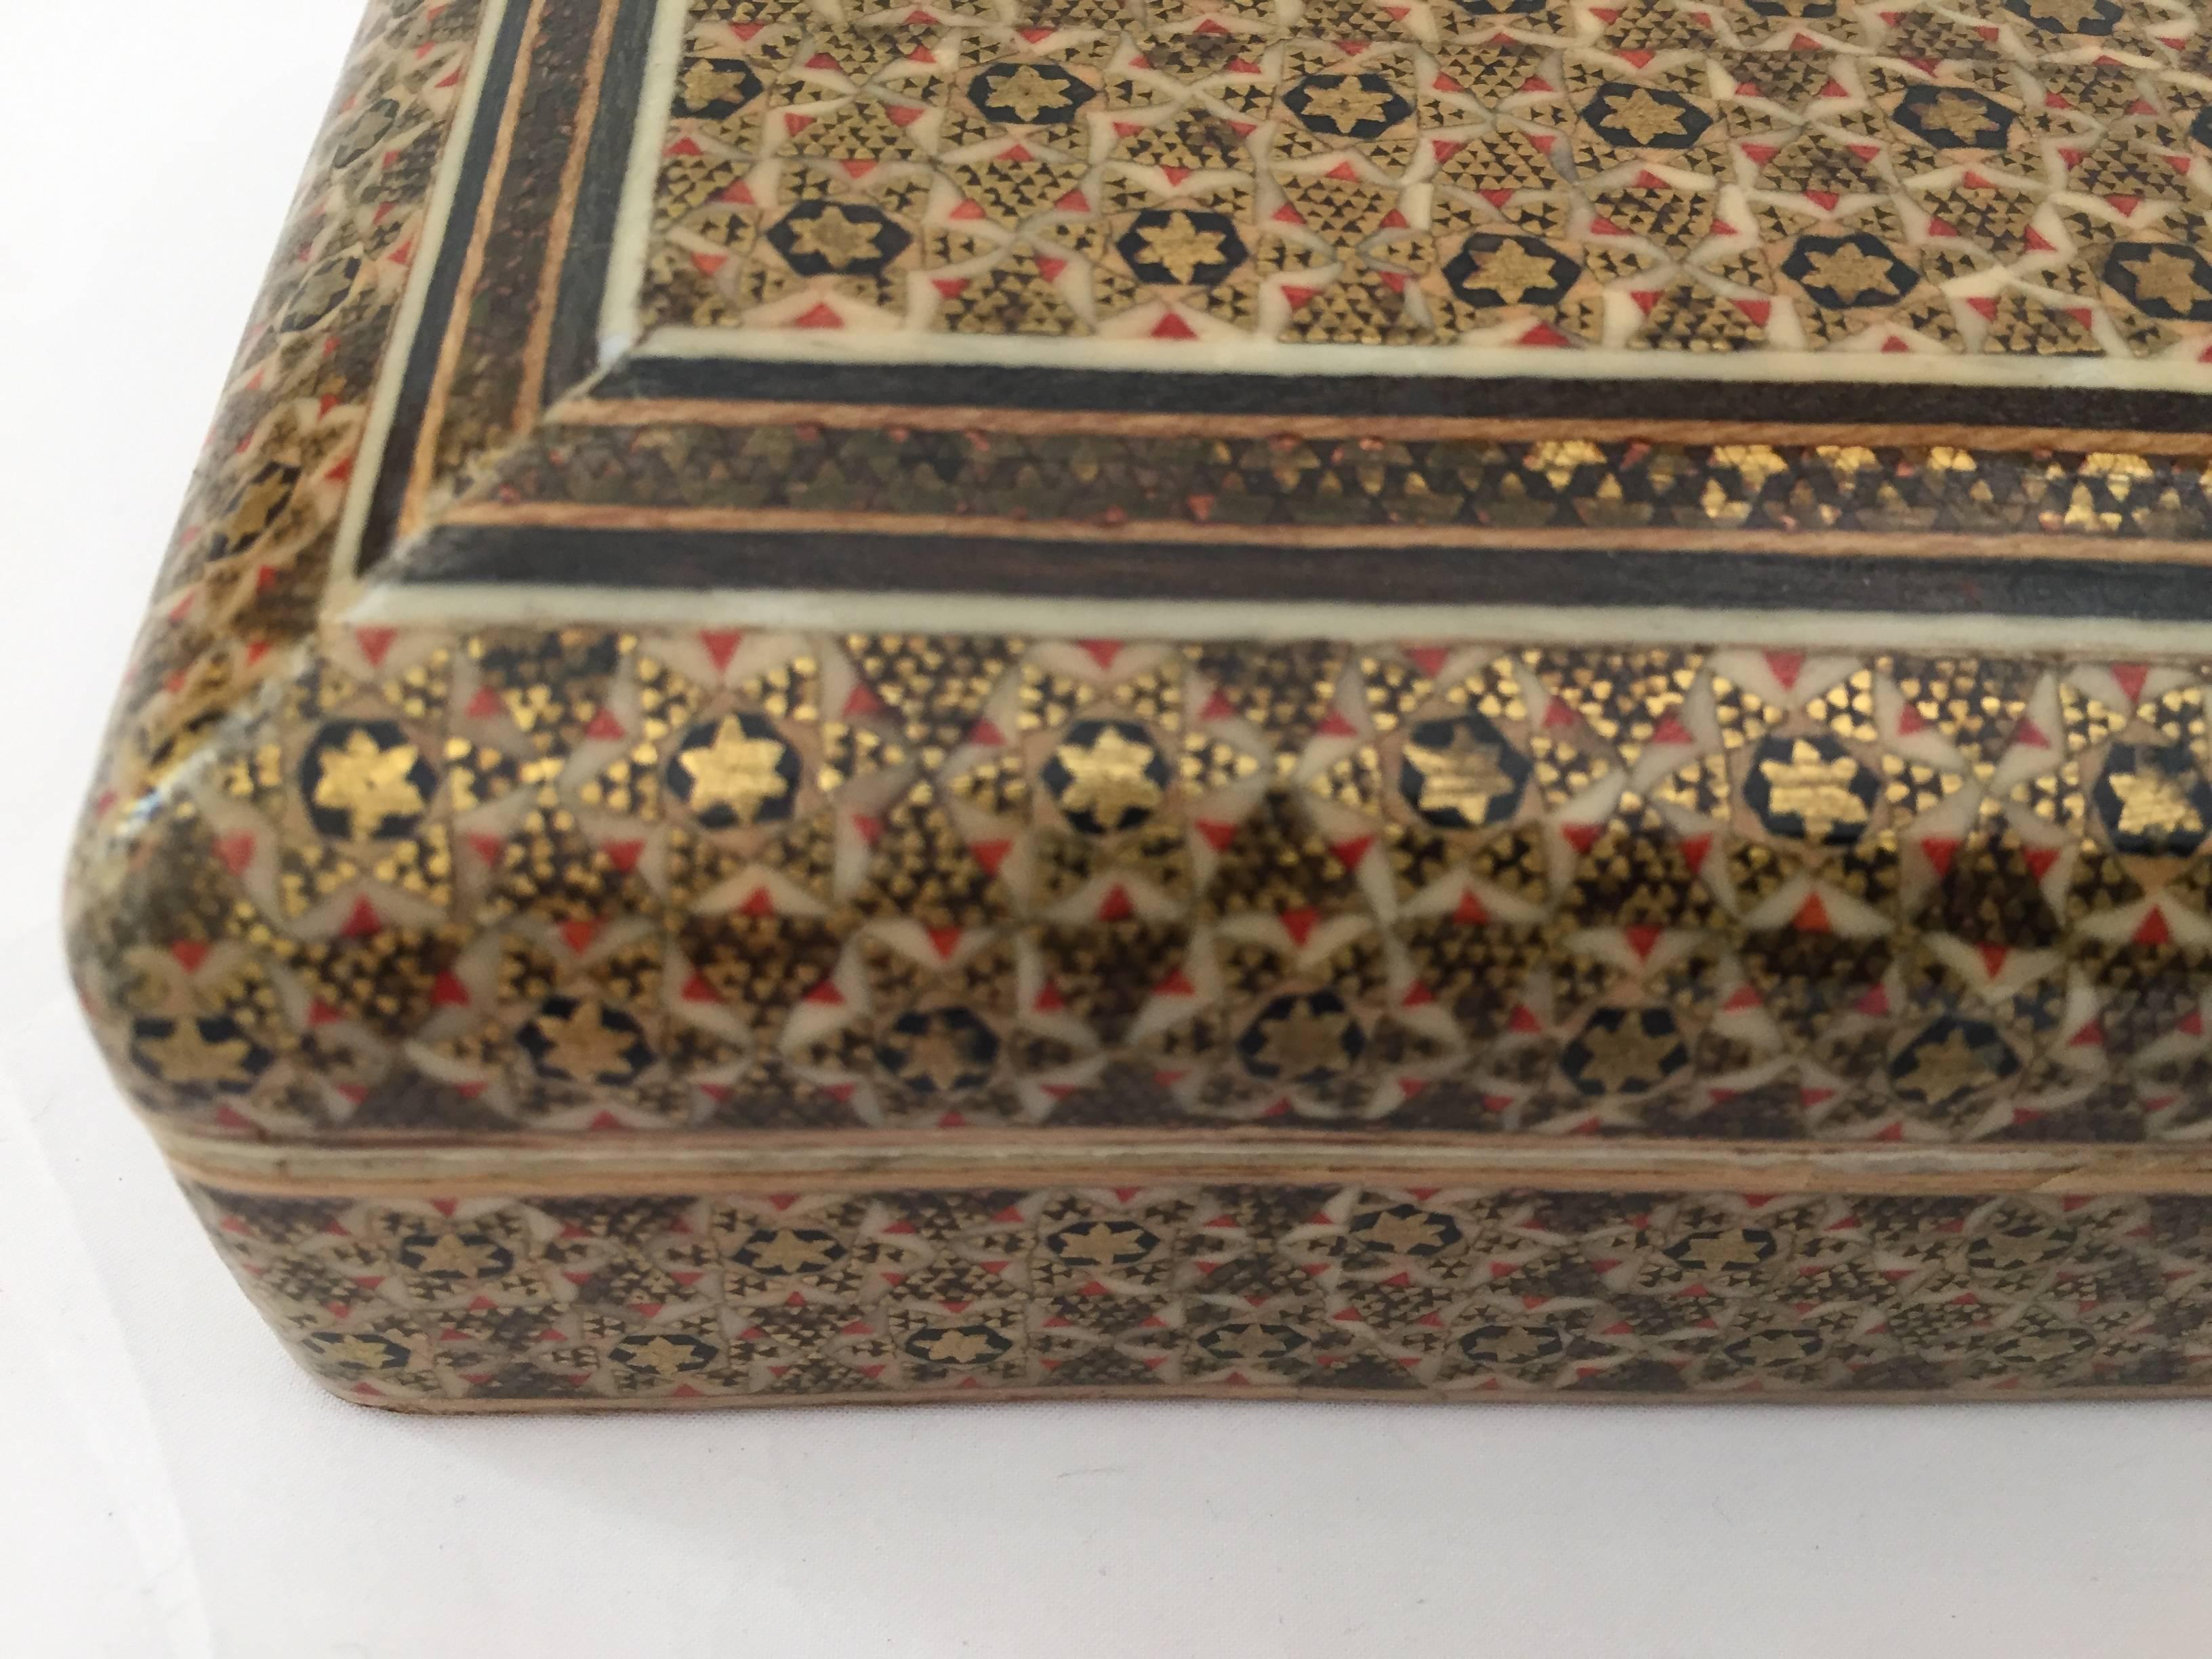 Indo-Persian Khatam Micro Mosaic Jewelry Box In Good Condition For Sale In North Hollywood, CA